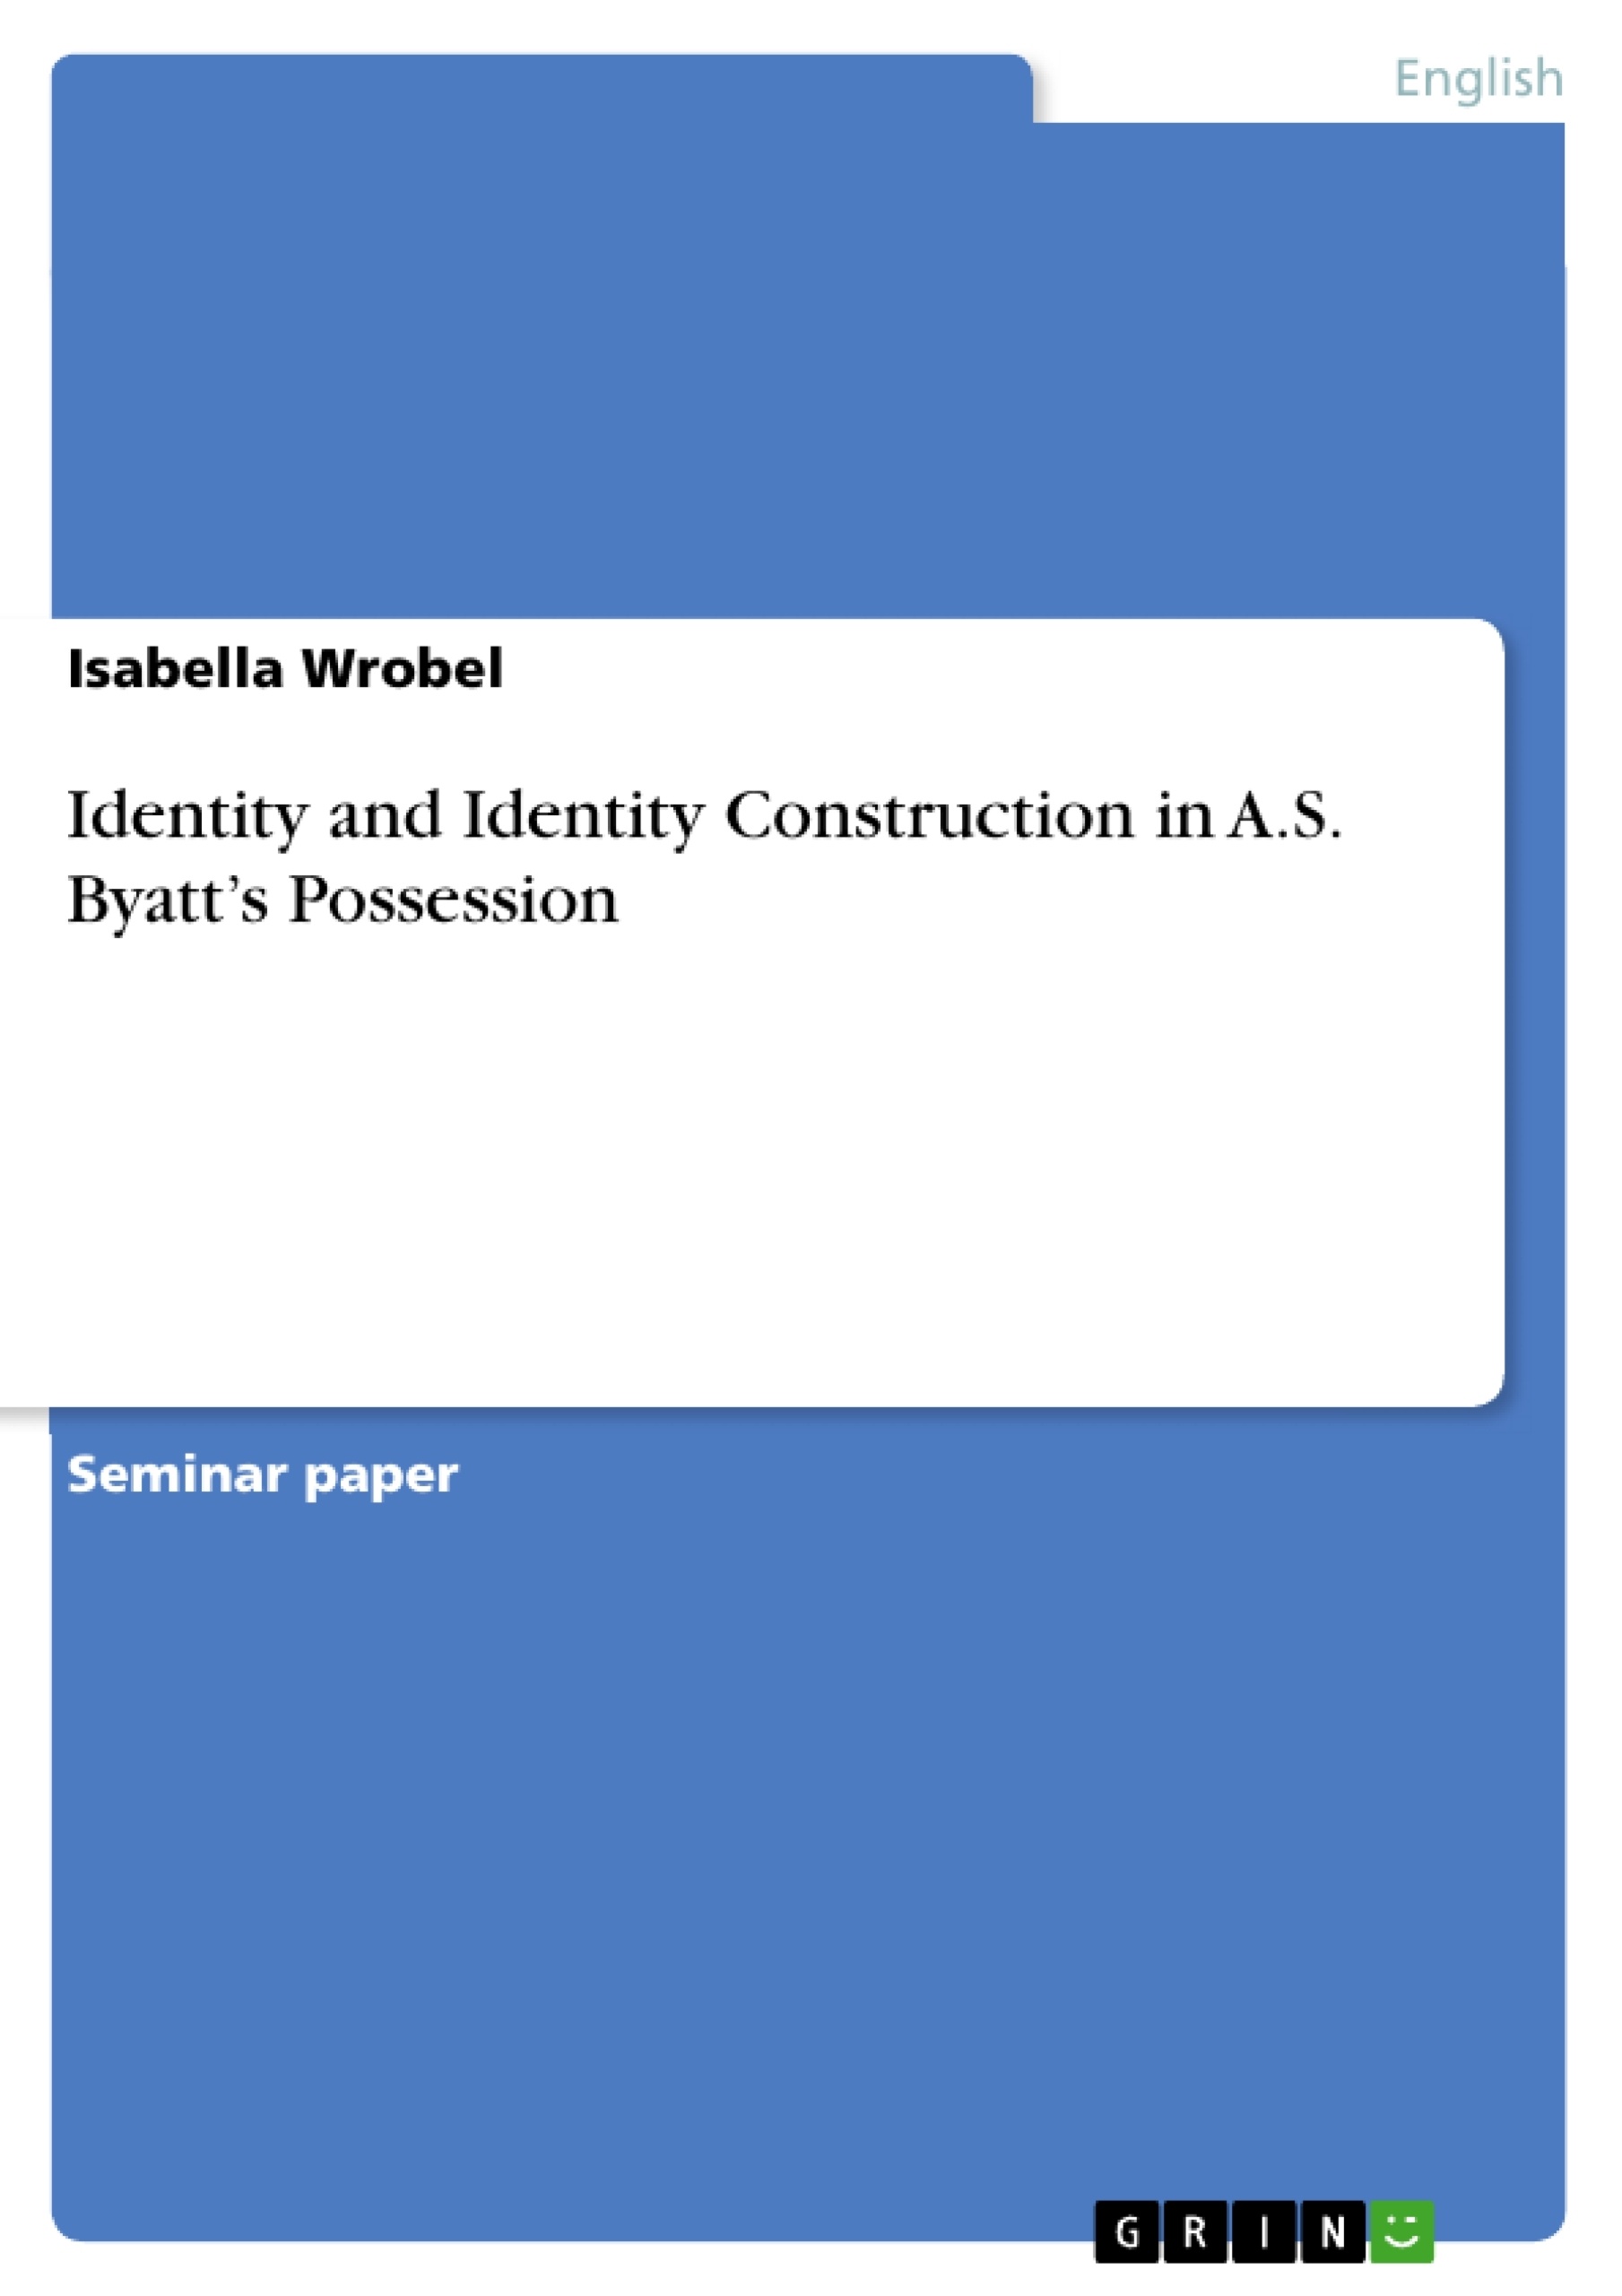 Title: Identity and Identity Construction in A.S. Byatt’s Possession